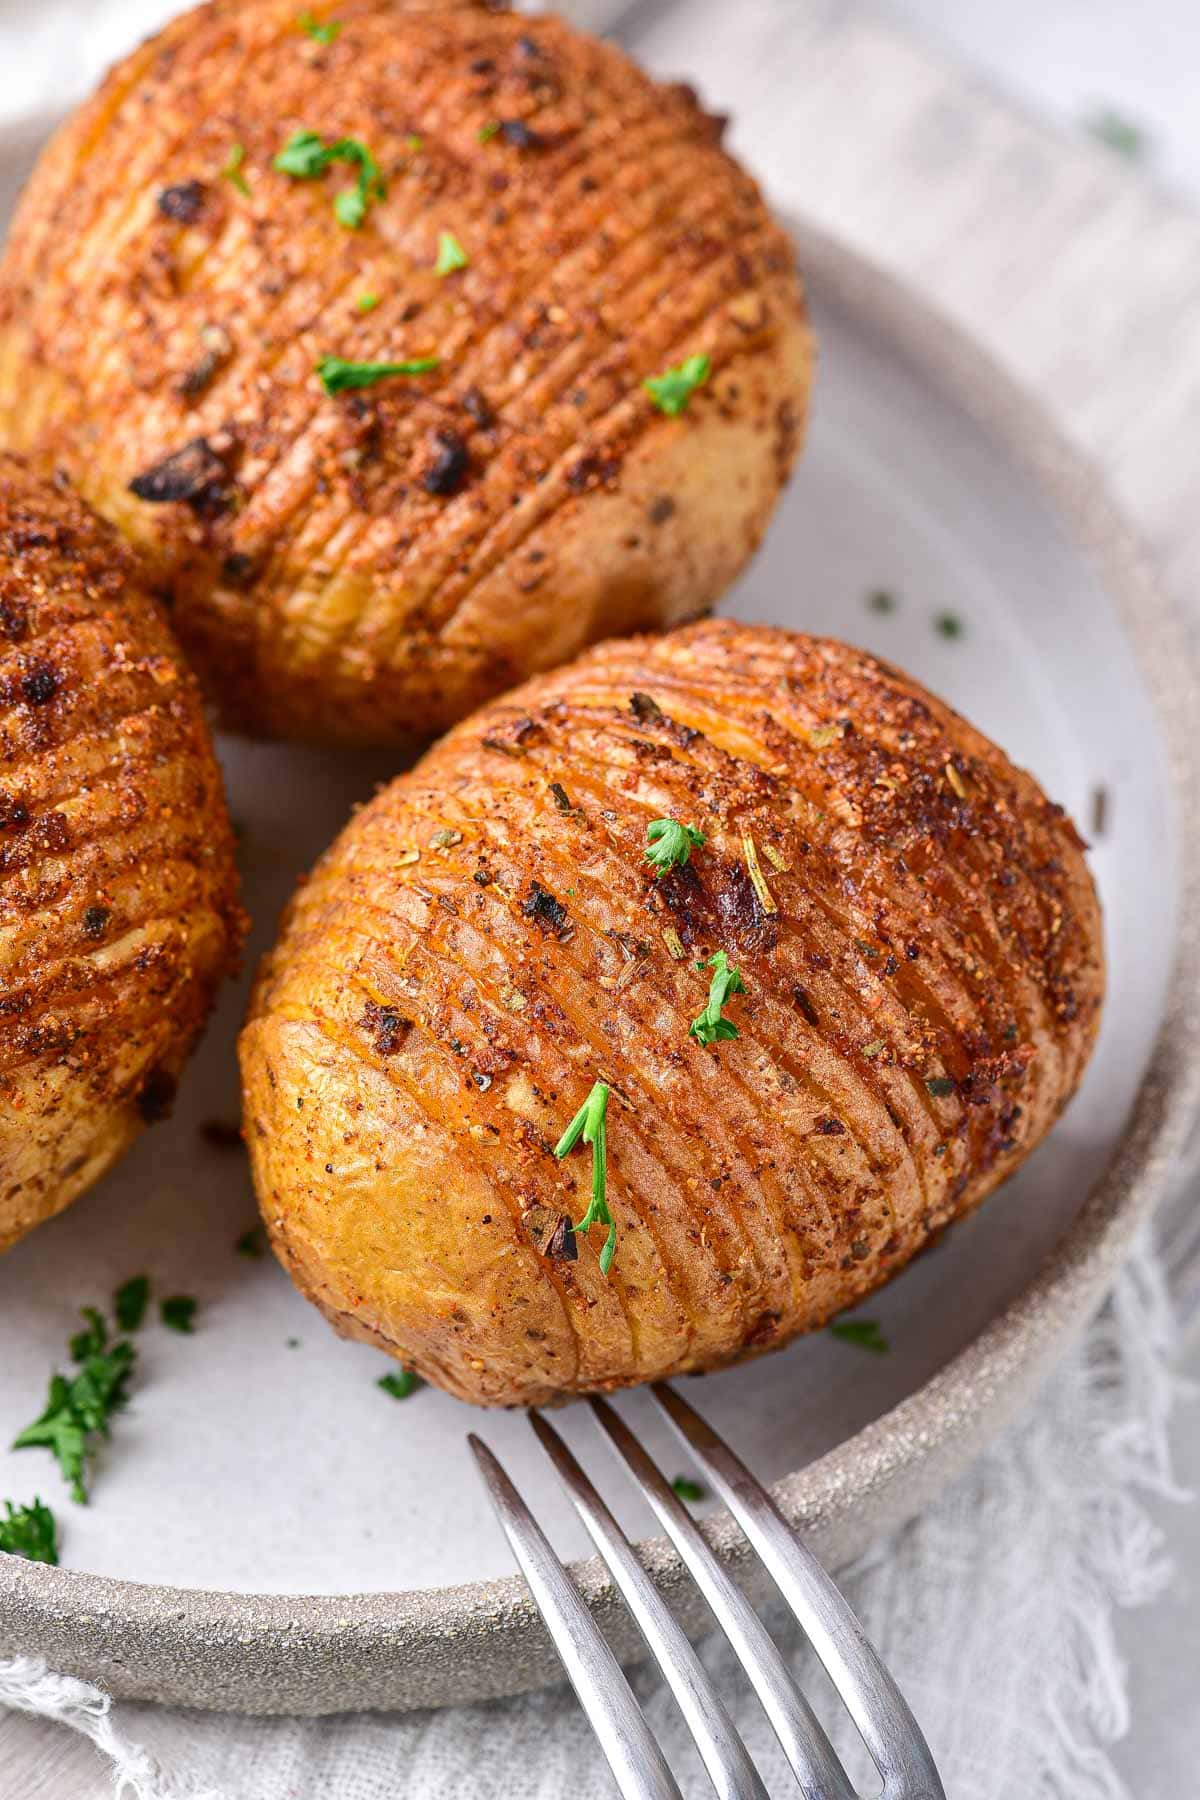 hasselback potatoes on round plate with chopped green parsley on top and fork beside.